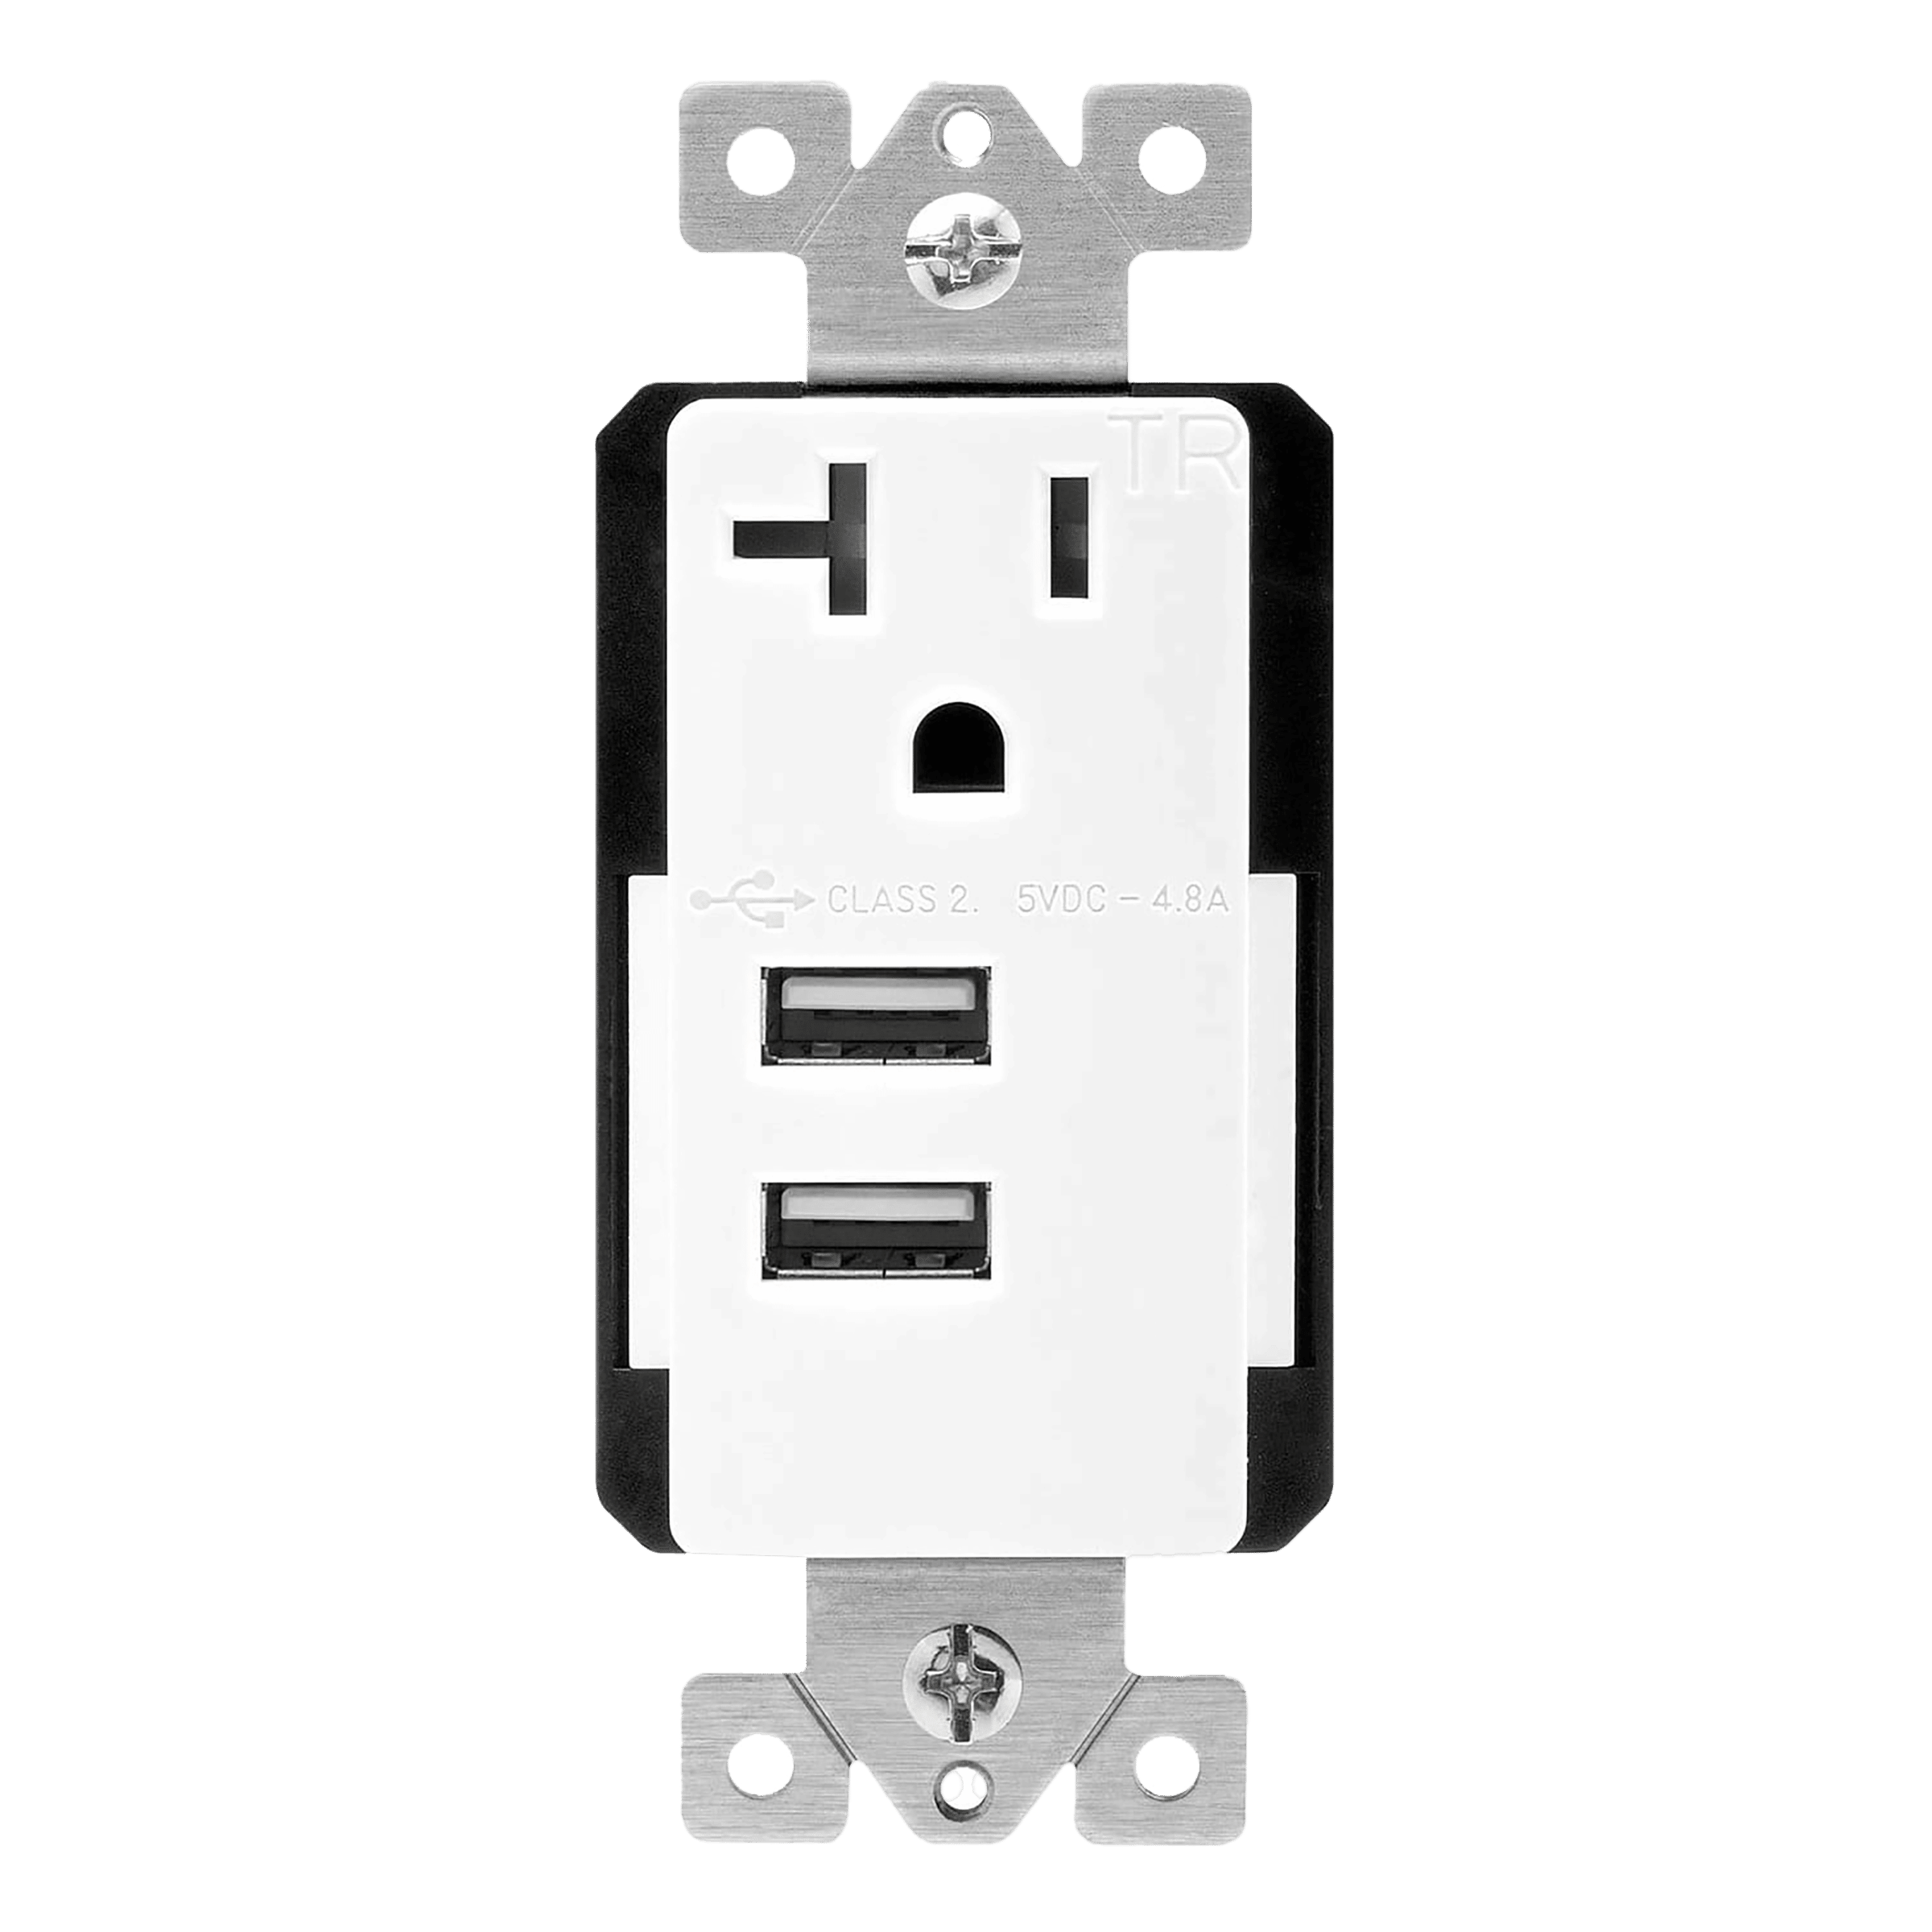 4.8A Dual USB-A Charging Outlet with Interchangeable Module, 20A/125V